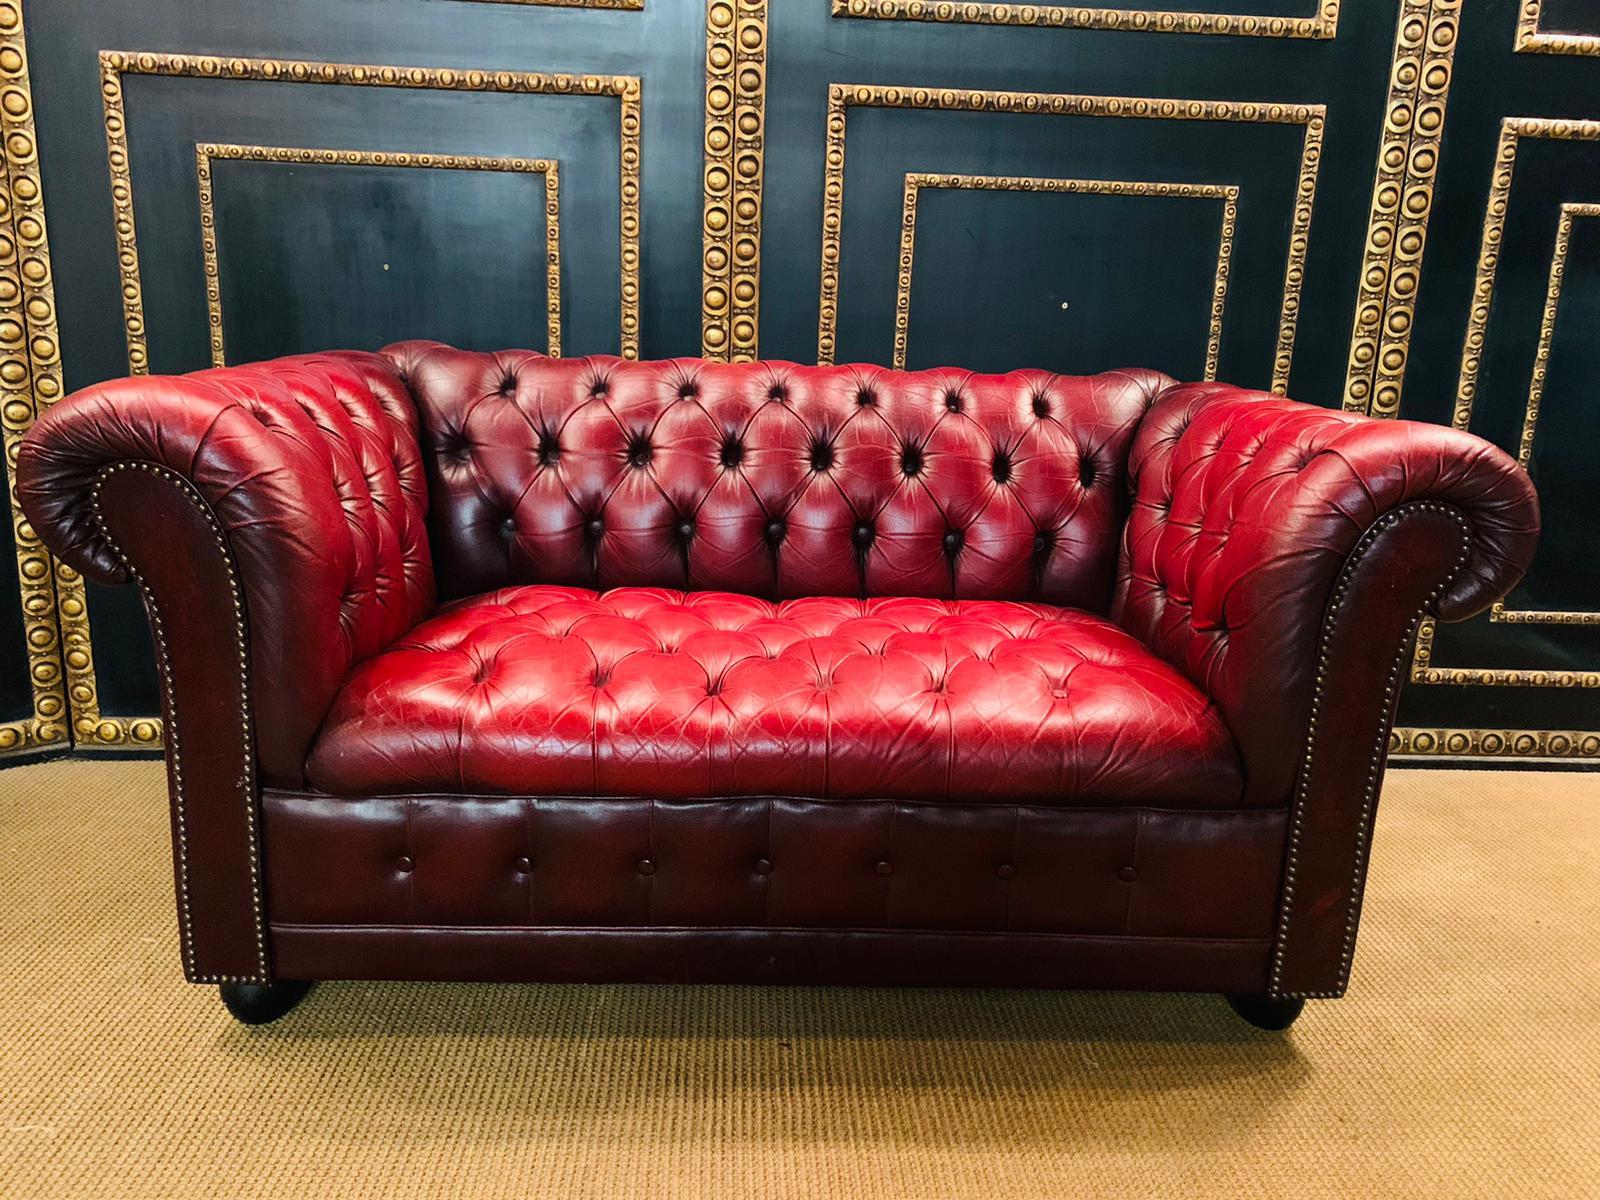 2-seat chesterfield sofa with button tufted detail, circa 1970. Exceptional quality. Double hand-stitching, and applied brass nailhead trim details. The ebonized composite orb feet have been left original, showing wear from age / use. The leather is